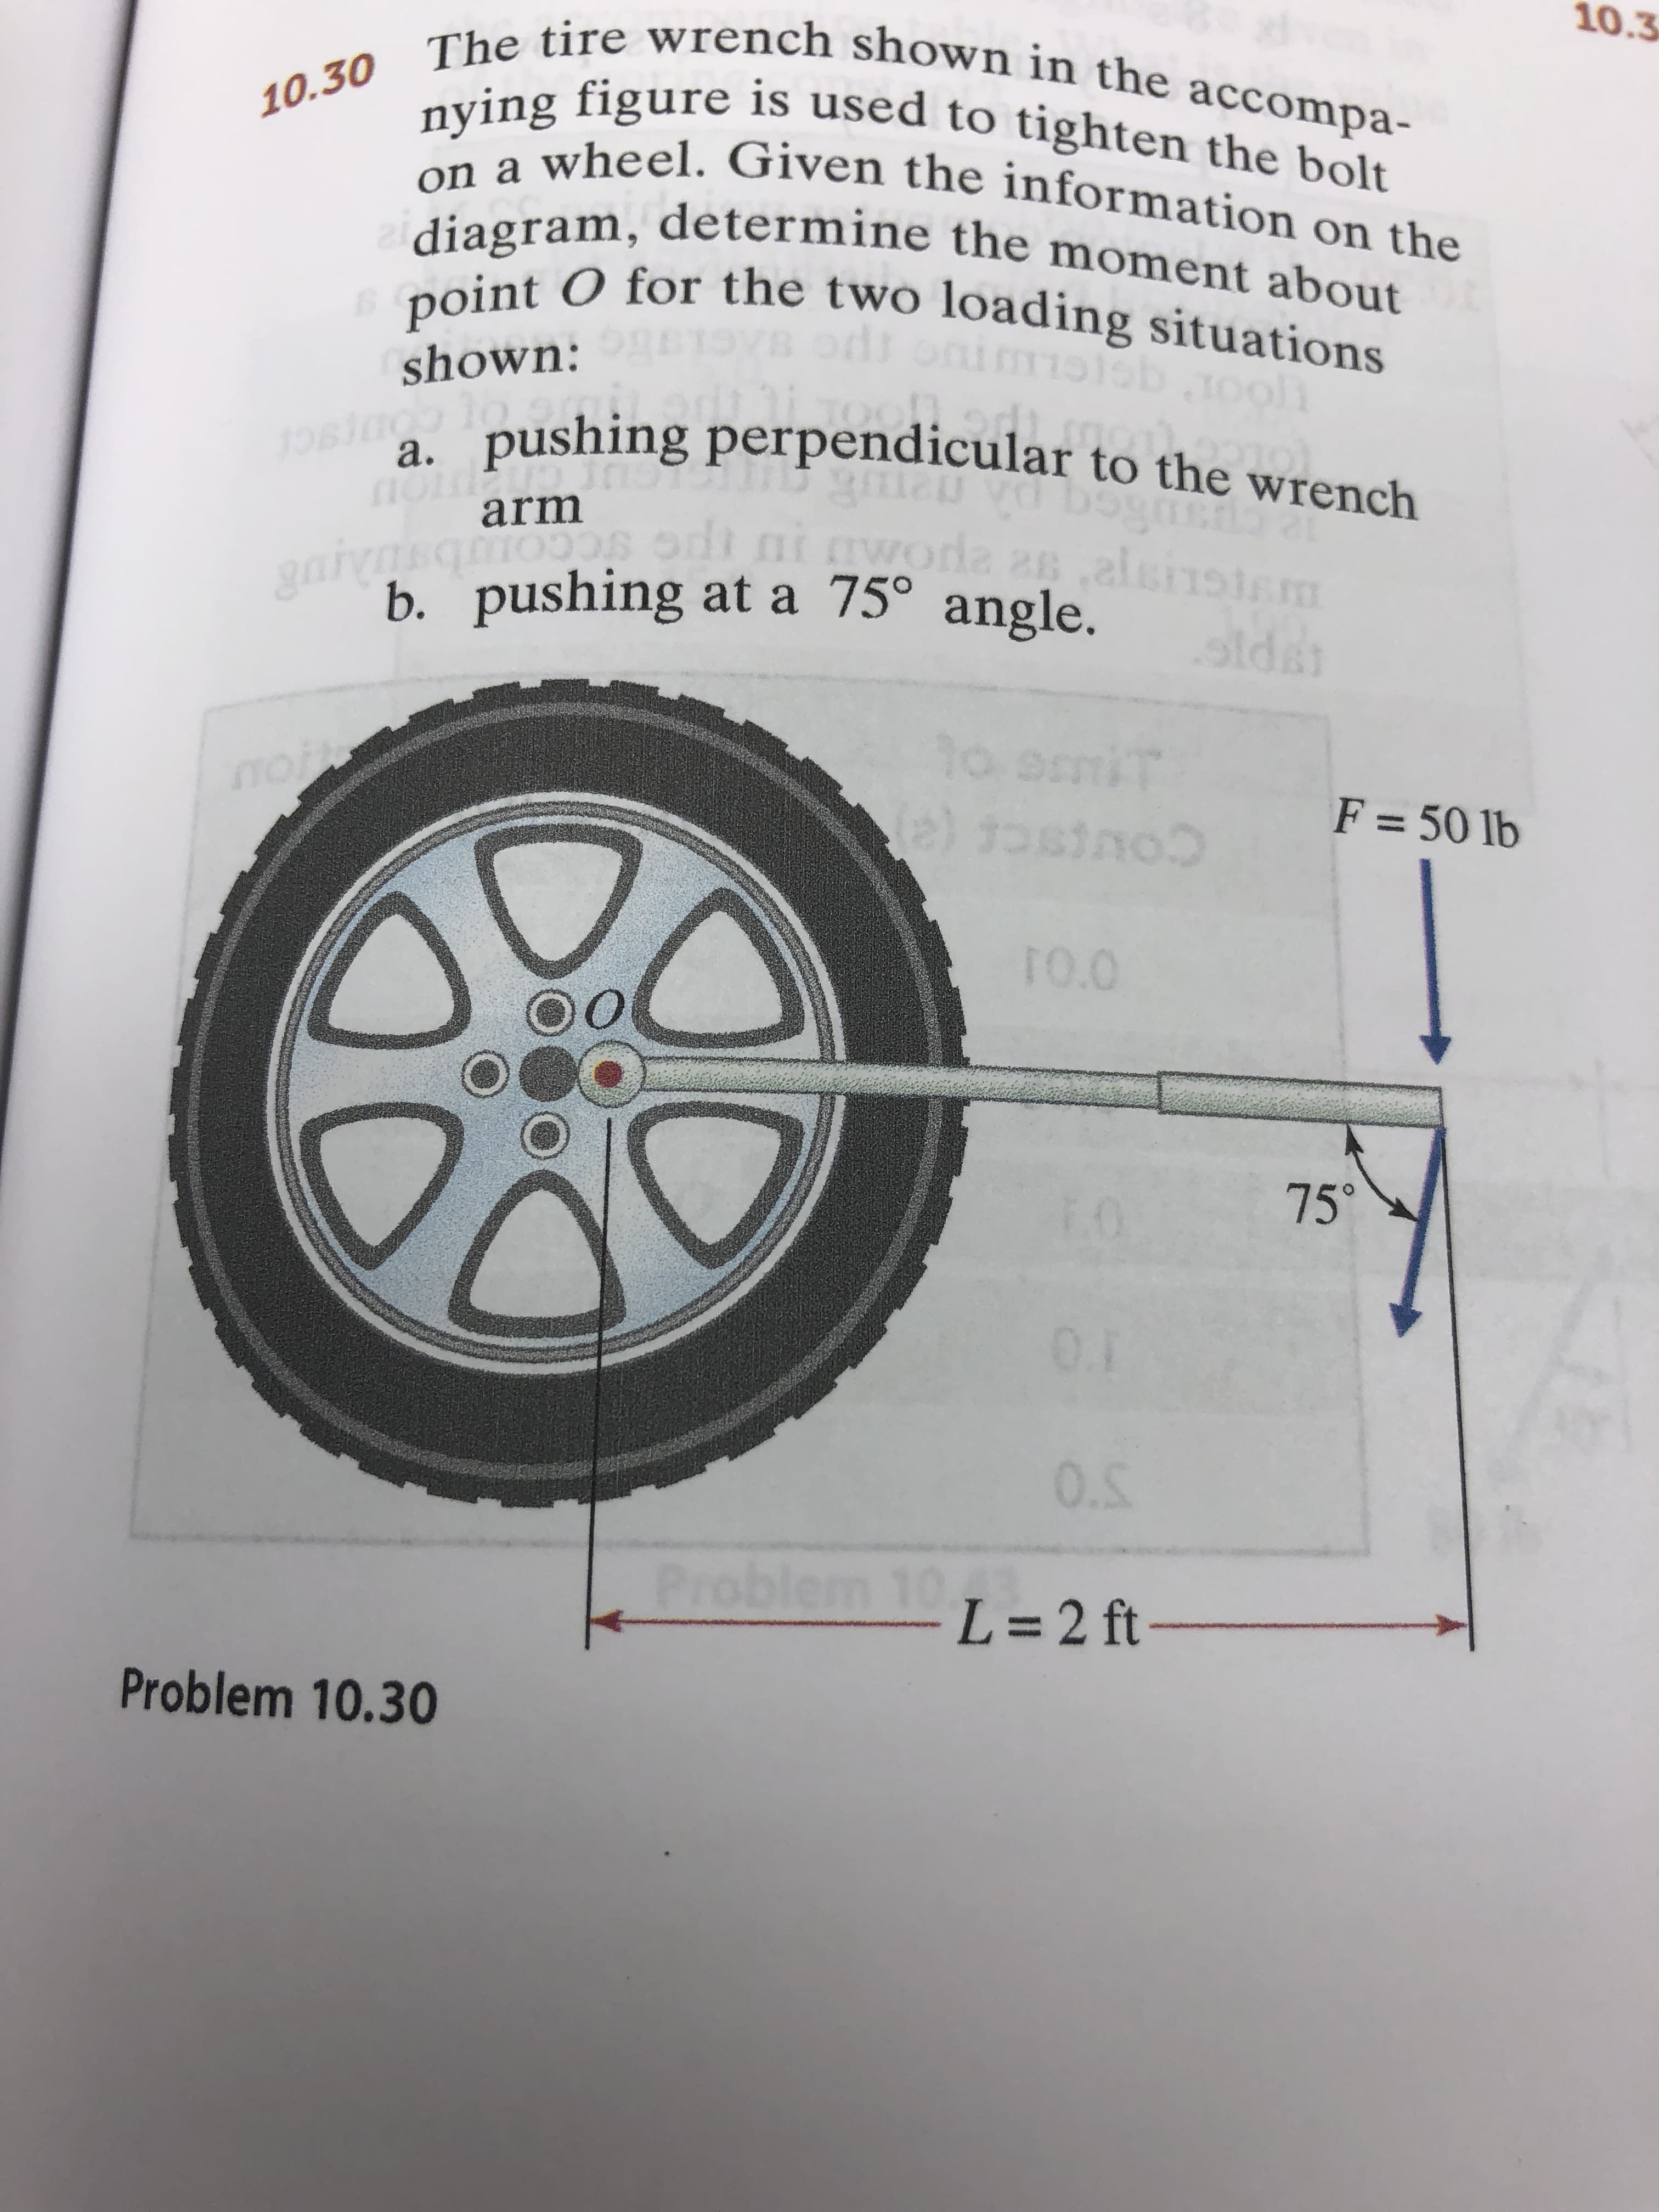 10.3
10.30 The tire wrench shown in the accompa-
nying figure is used to tighten the bolt
on a wheel. Given the information on the
diagram, determine the moment about
point O for the two loading situations
odr
tCL
. pushing perpendicular to the wrench
shown:
1O61 1o
а.
arm
da a,alsnstm
gai
b. pushing at a 75° angle.
siCC
sida
1o it
(e) tosino
no
F = 50 lb
noC
TO.O
OO
75
0.1
0.5
Problem 10.
L=2 ft-
Problem 10.30
